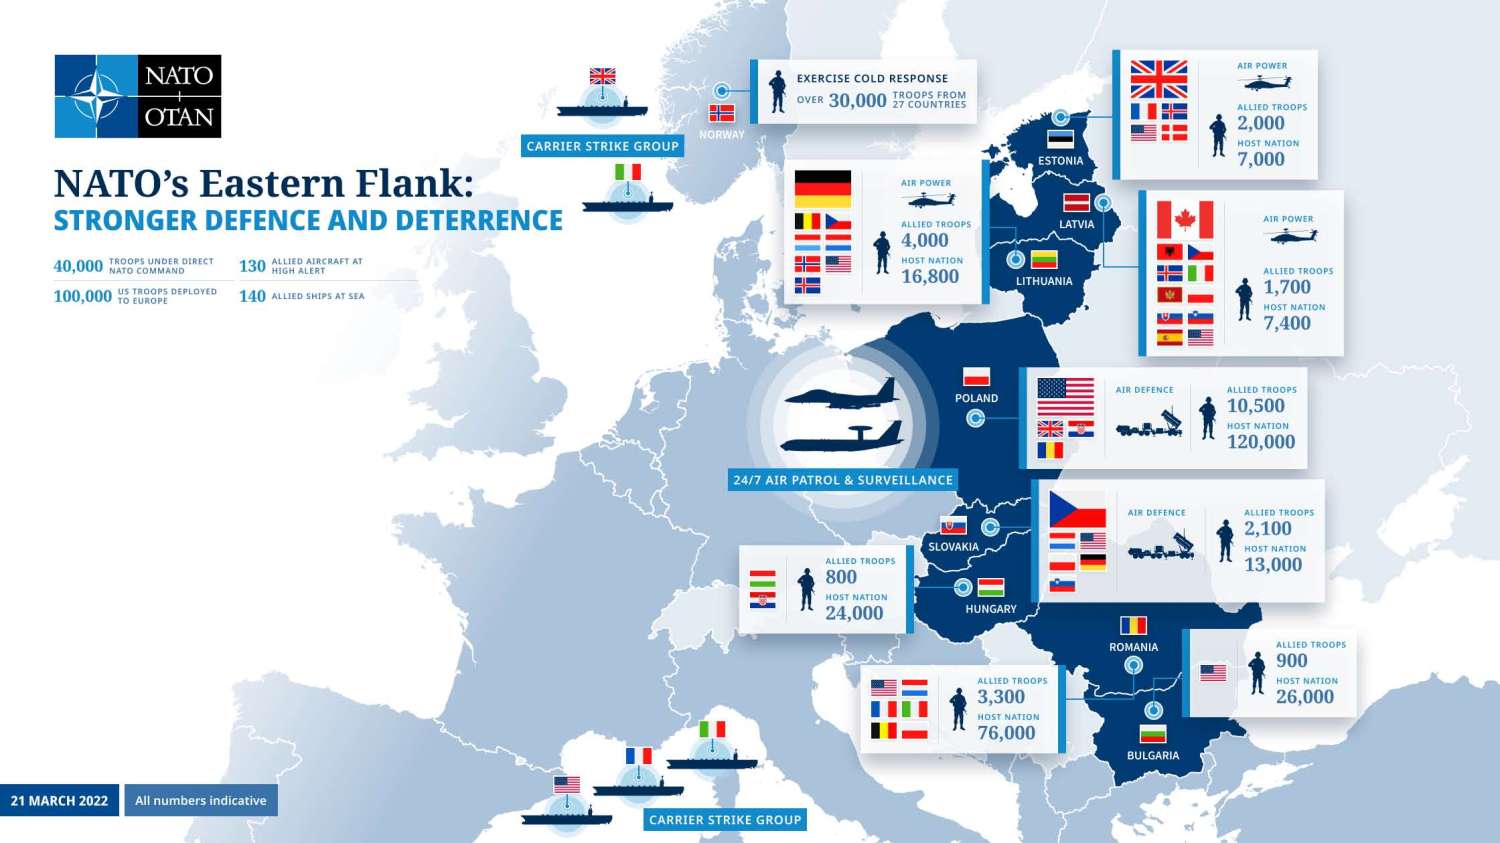 NATO'S EASTERN FLANK: STRONGER DEFENCE AND DETERRENCE